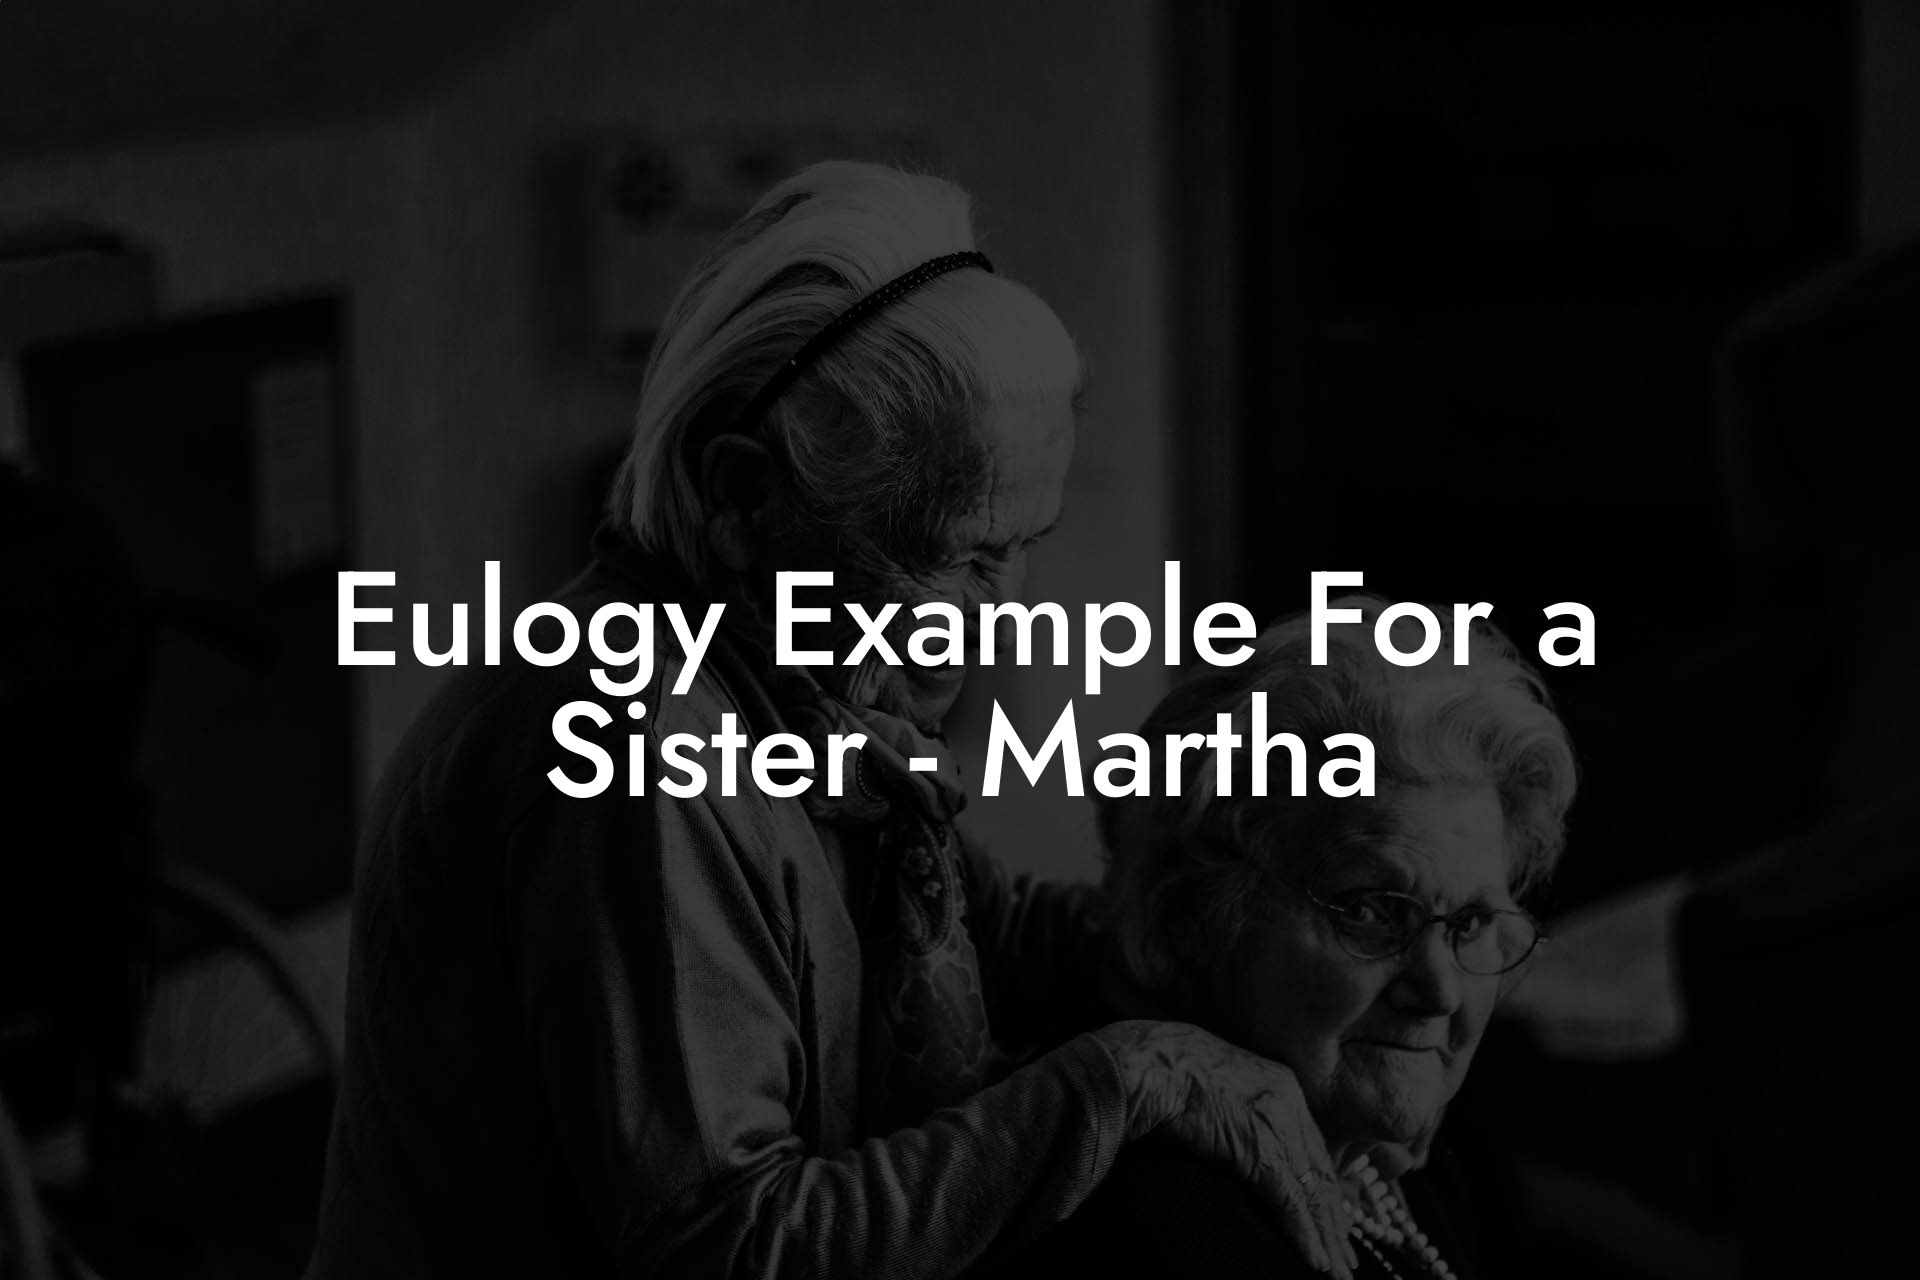 Eulogy Example For a Sister - Martha